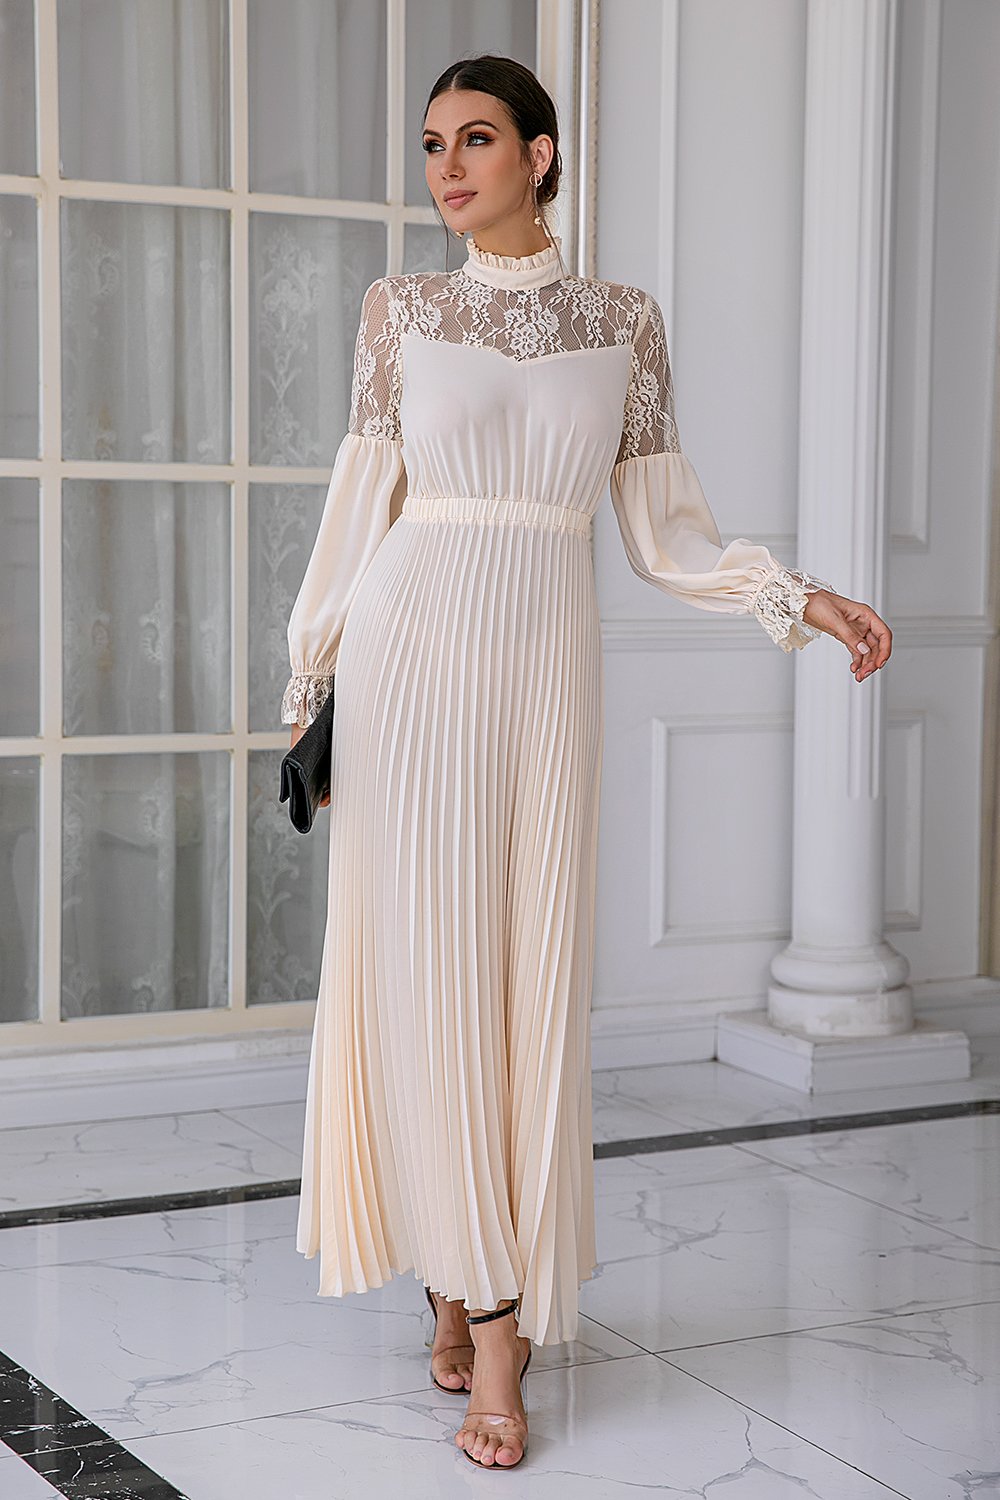 Apricot Long Sleeves Lace Mother Dress